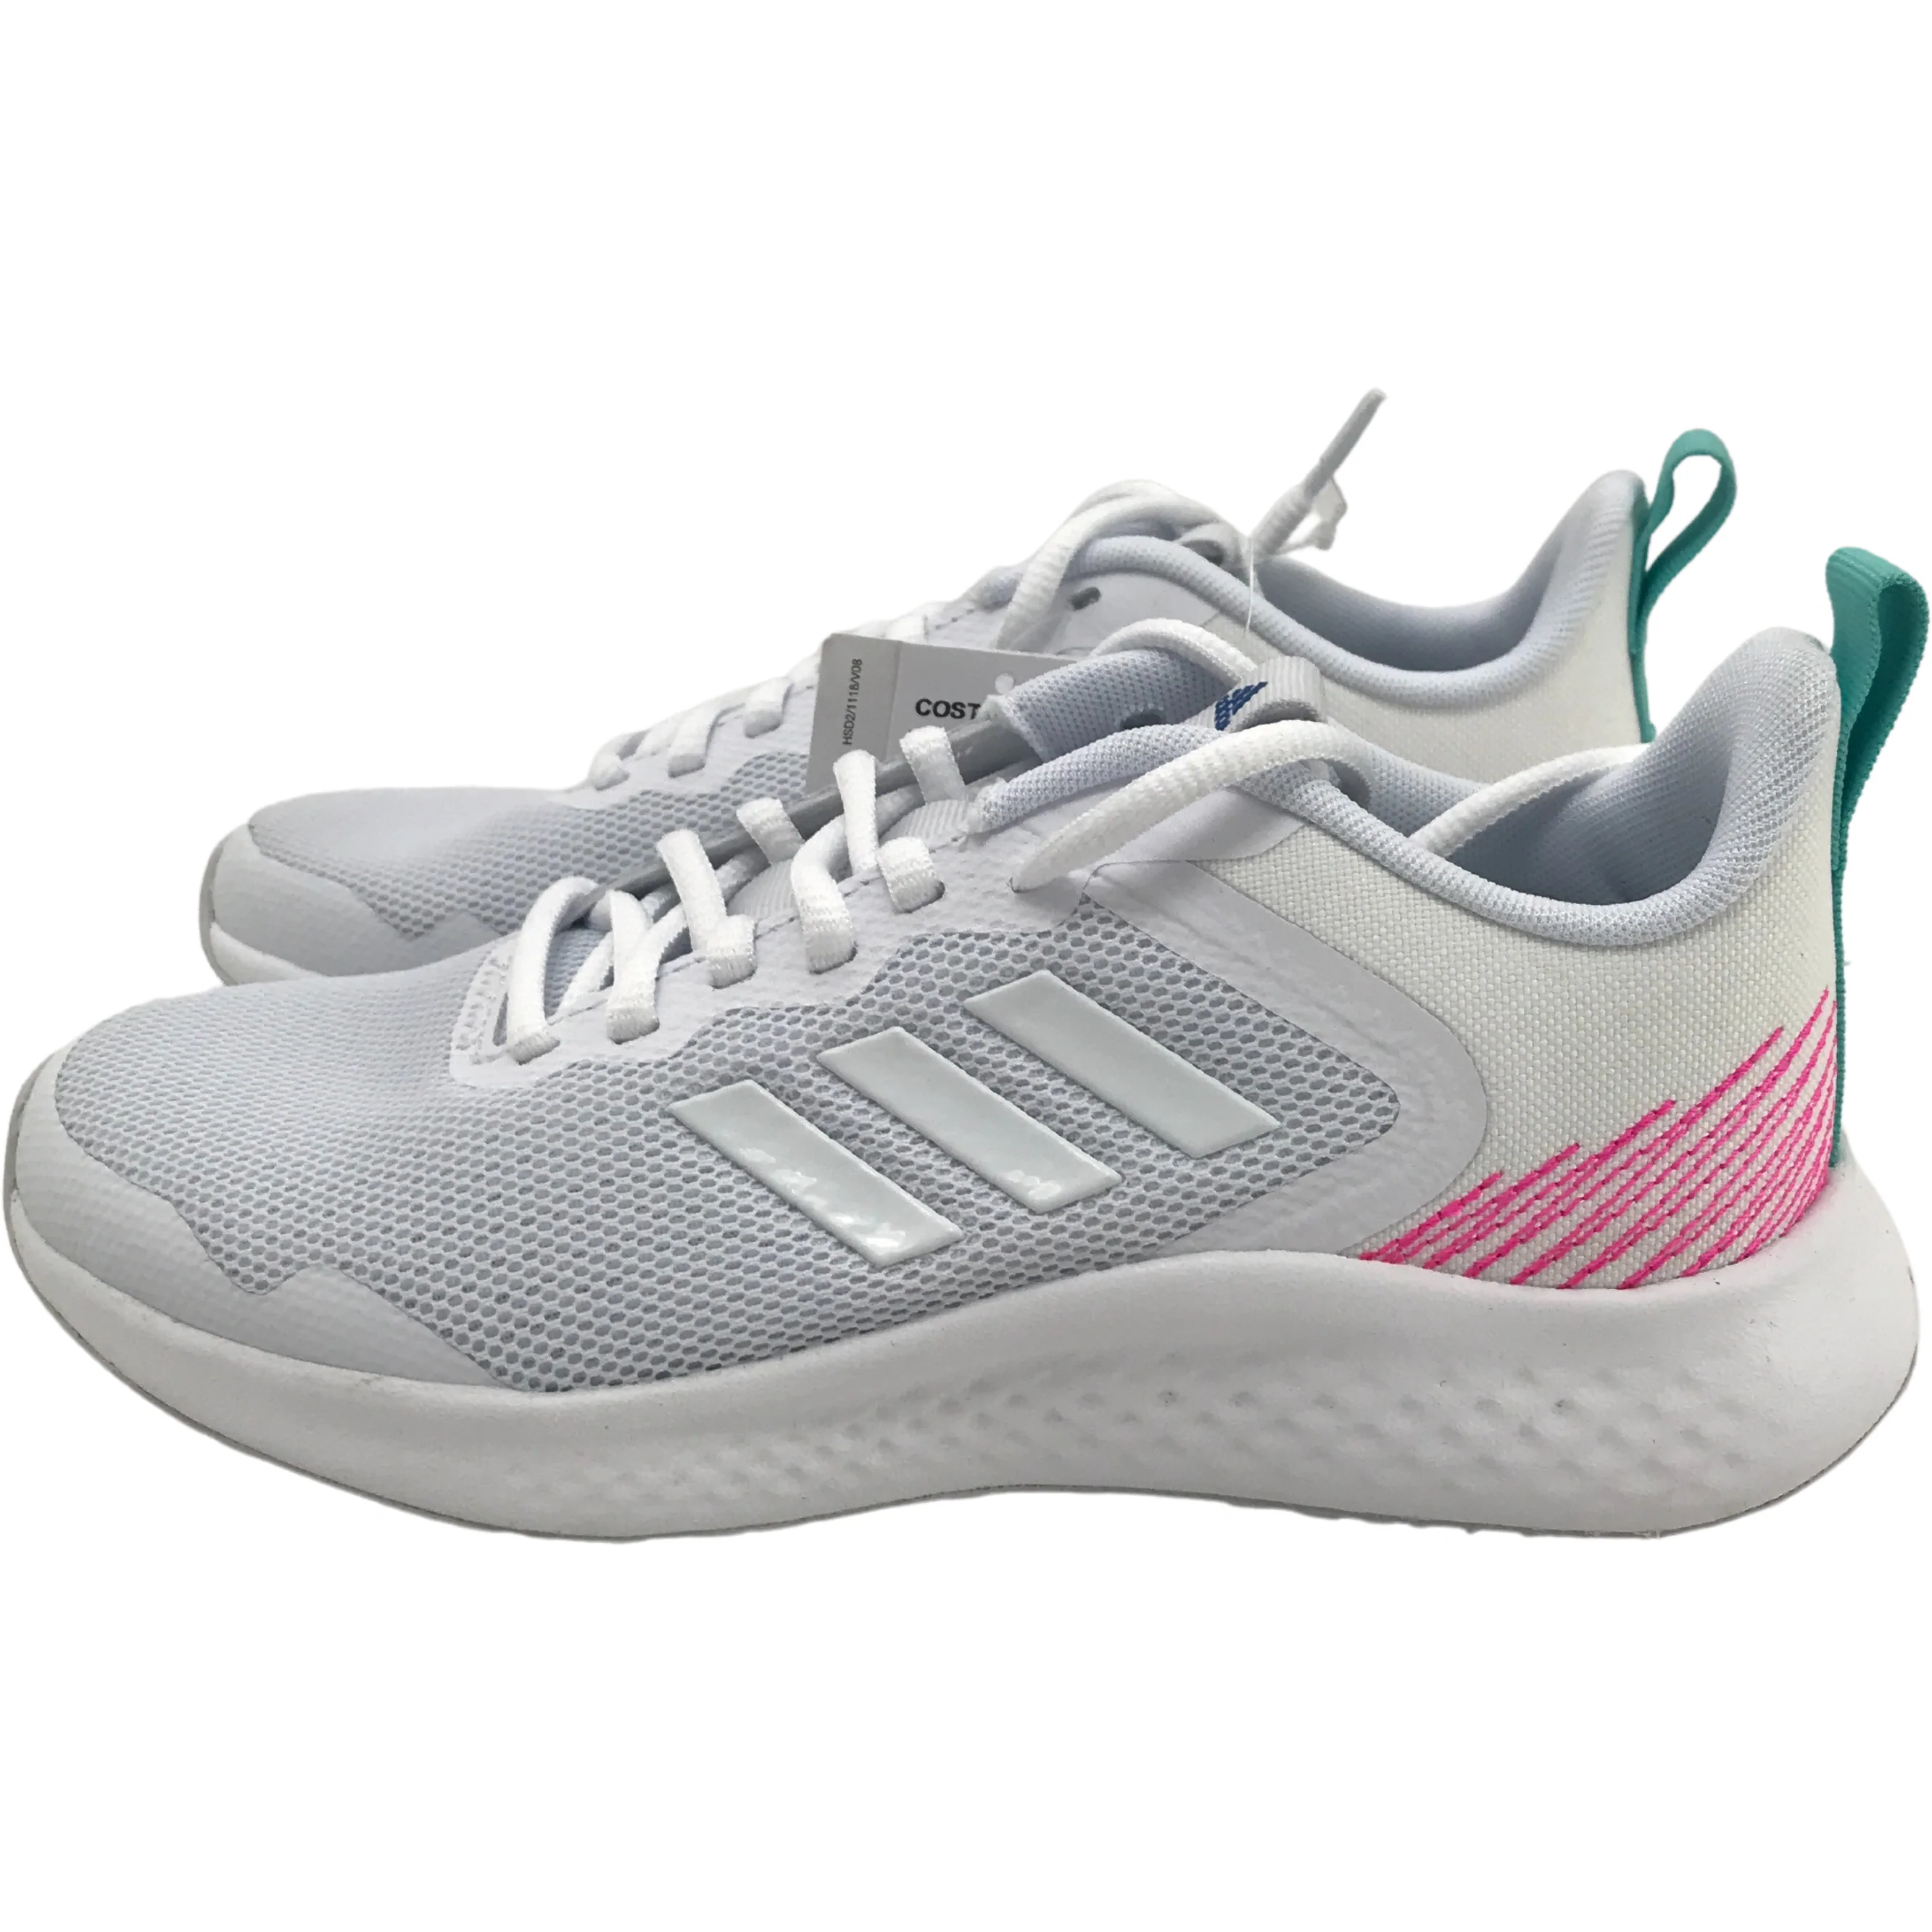 Adidas Women's Running Shoes / FluidStreet / White with Pink and Green / Size 5